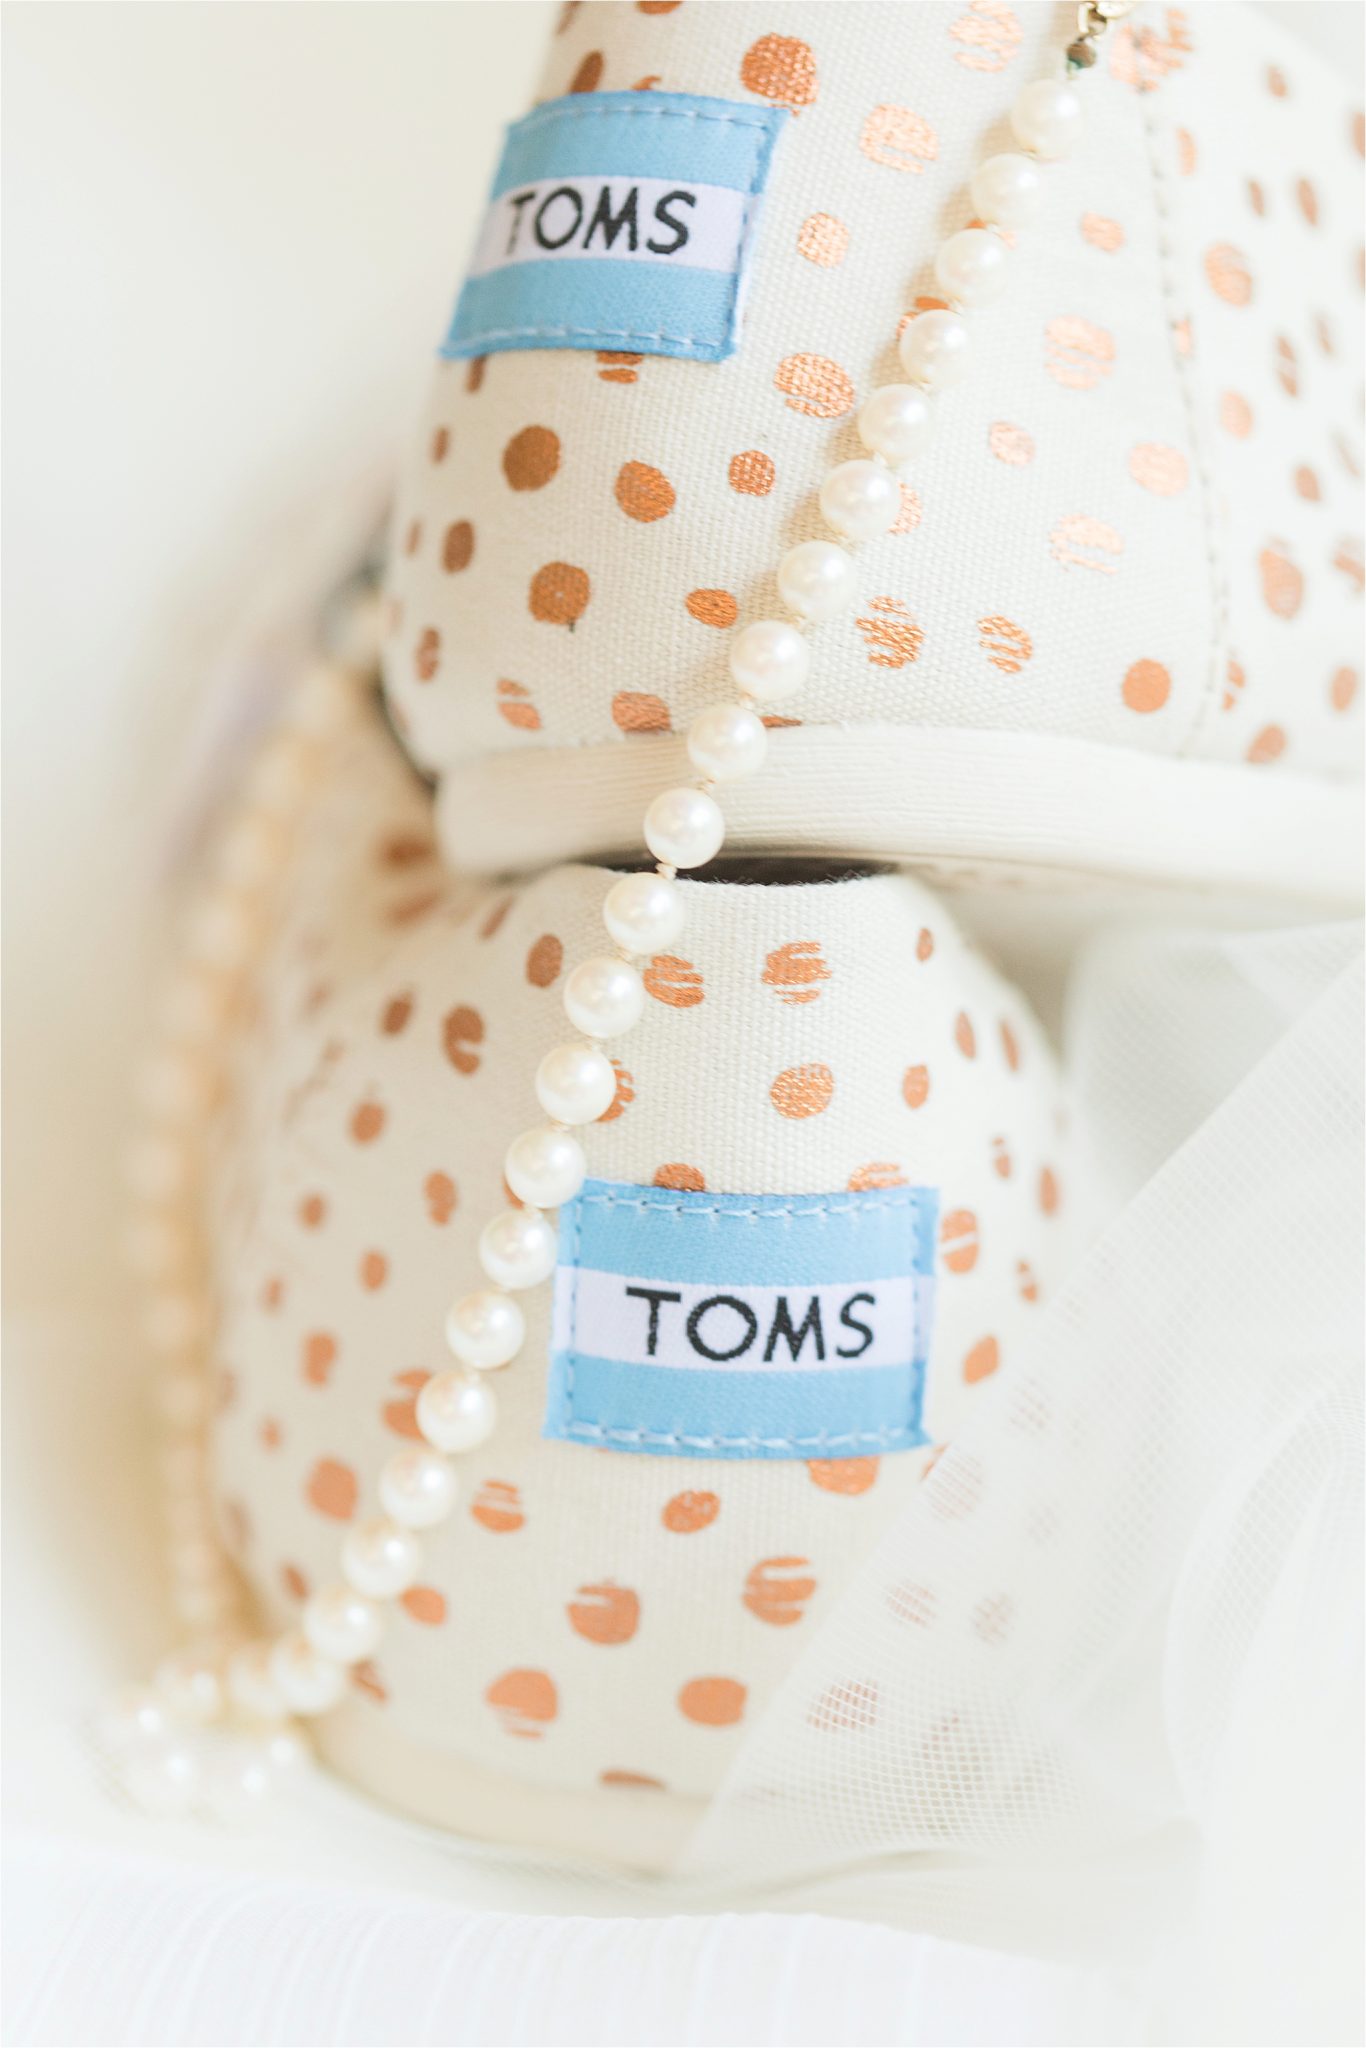 Toms wedding shoes-pearls-gold detail